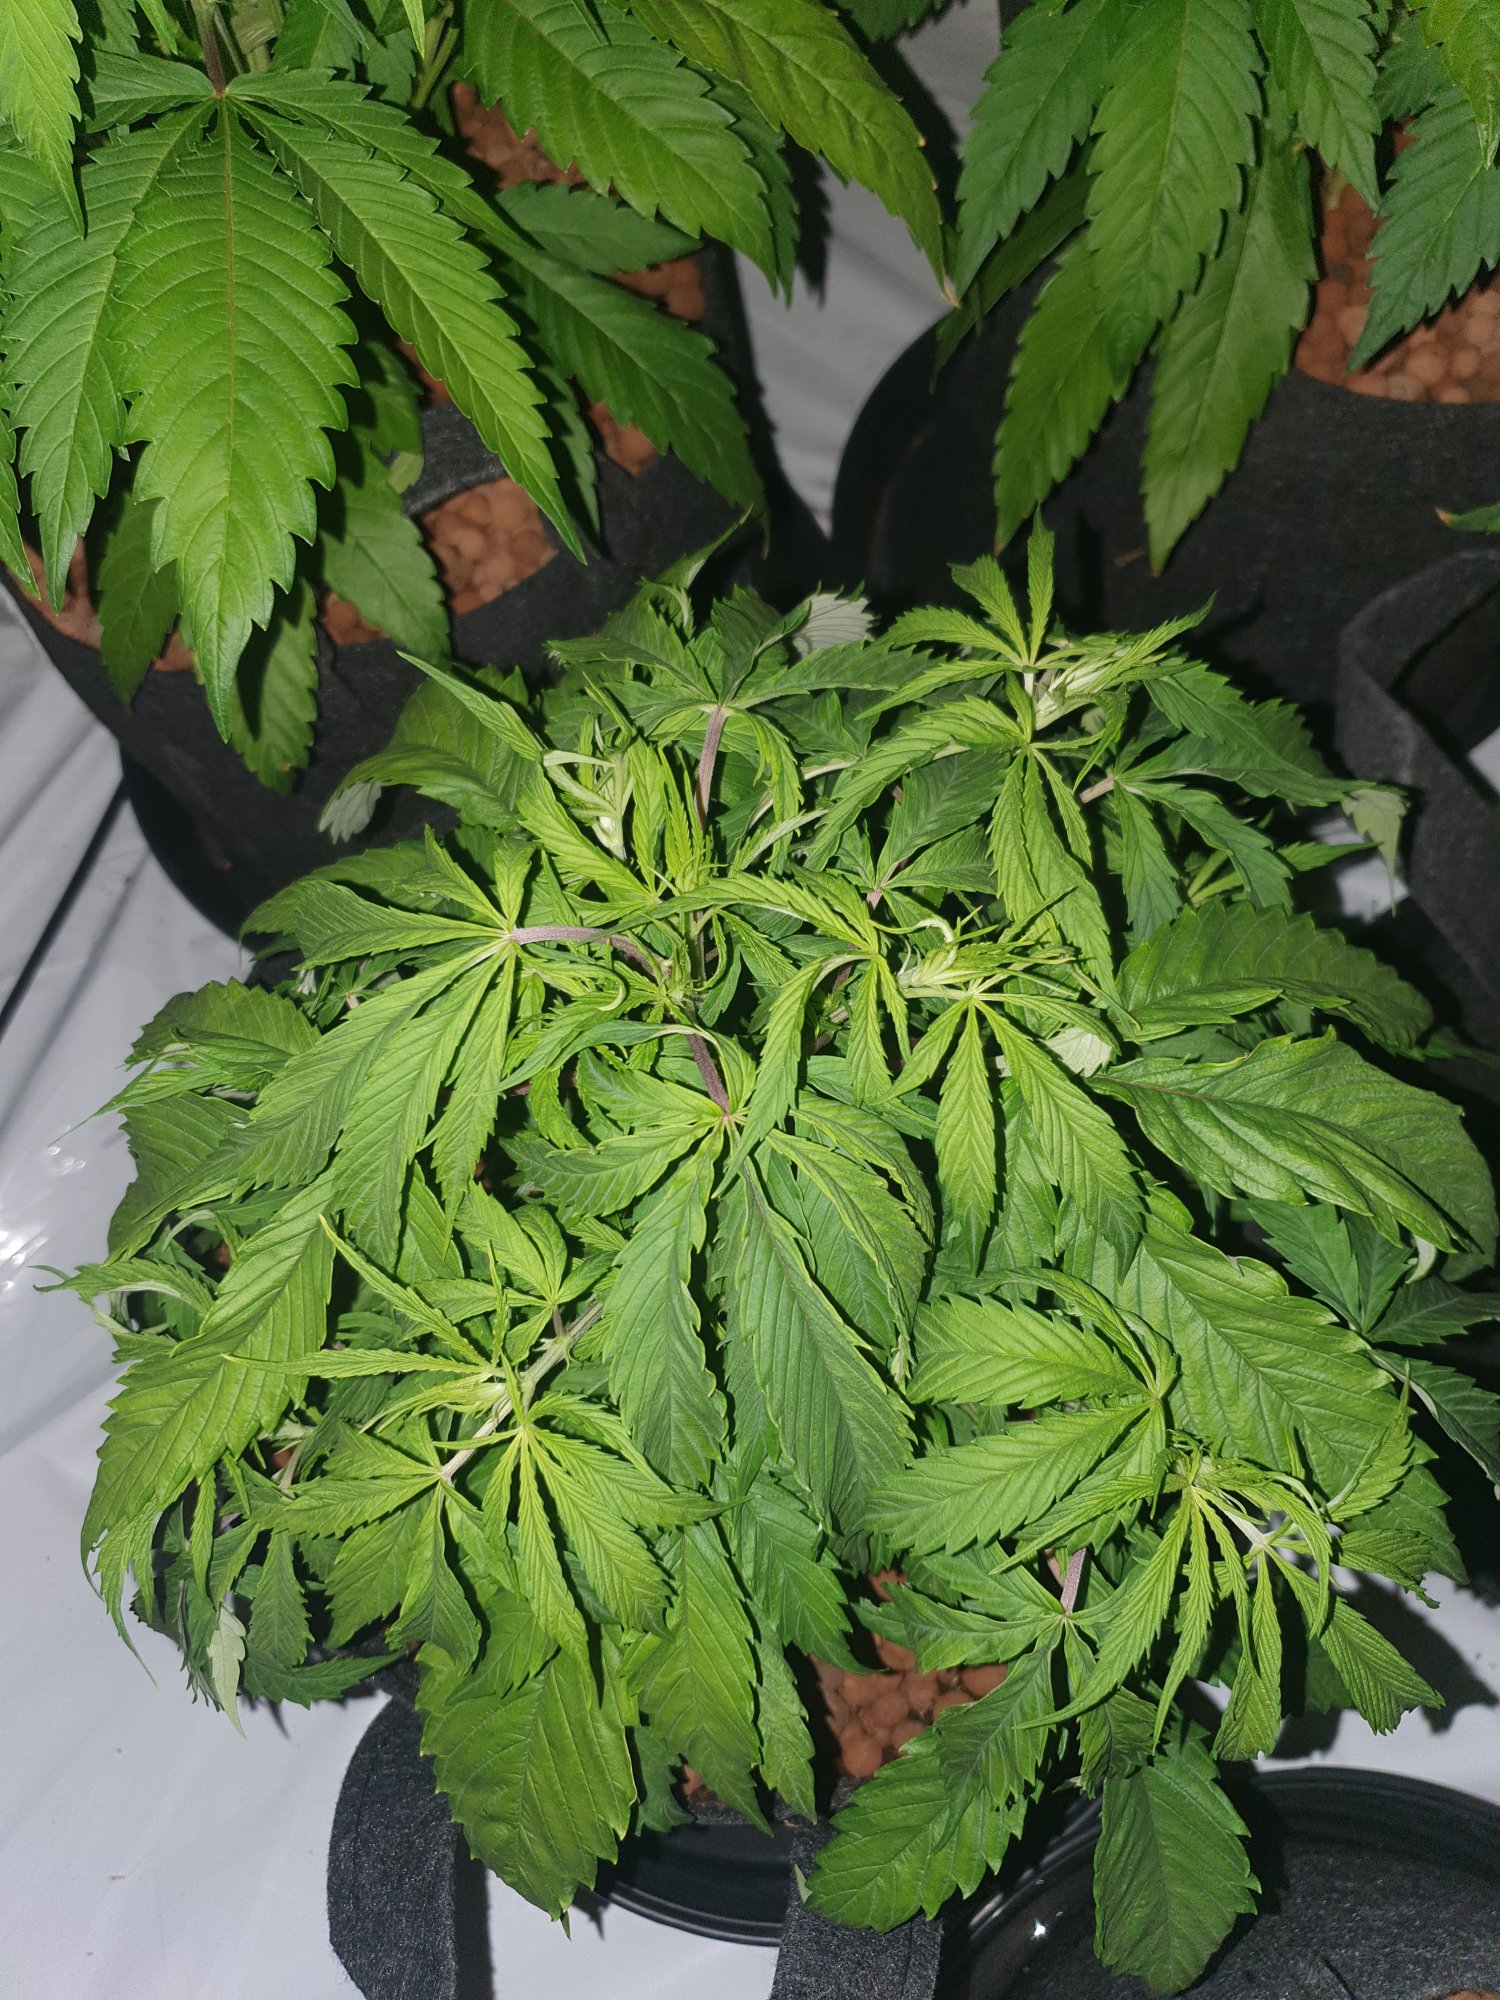 First time growing in coco